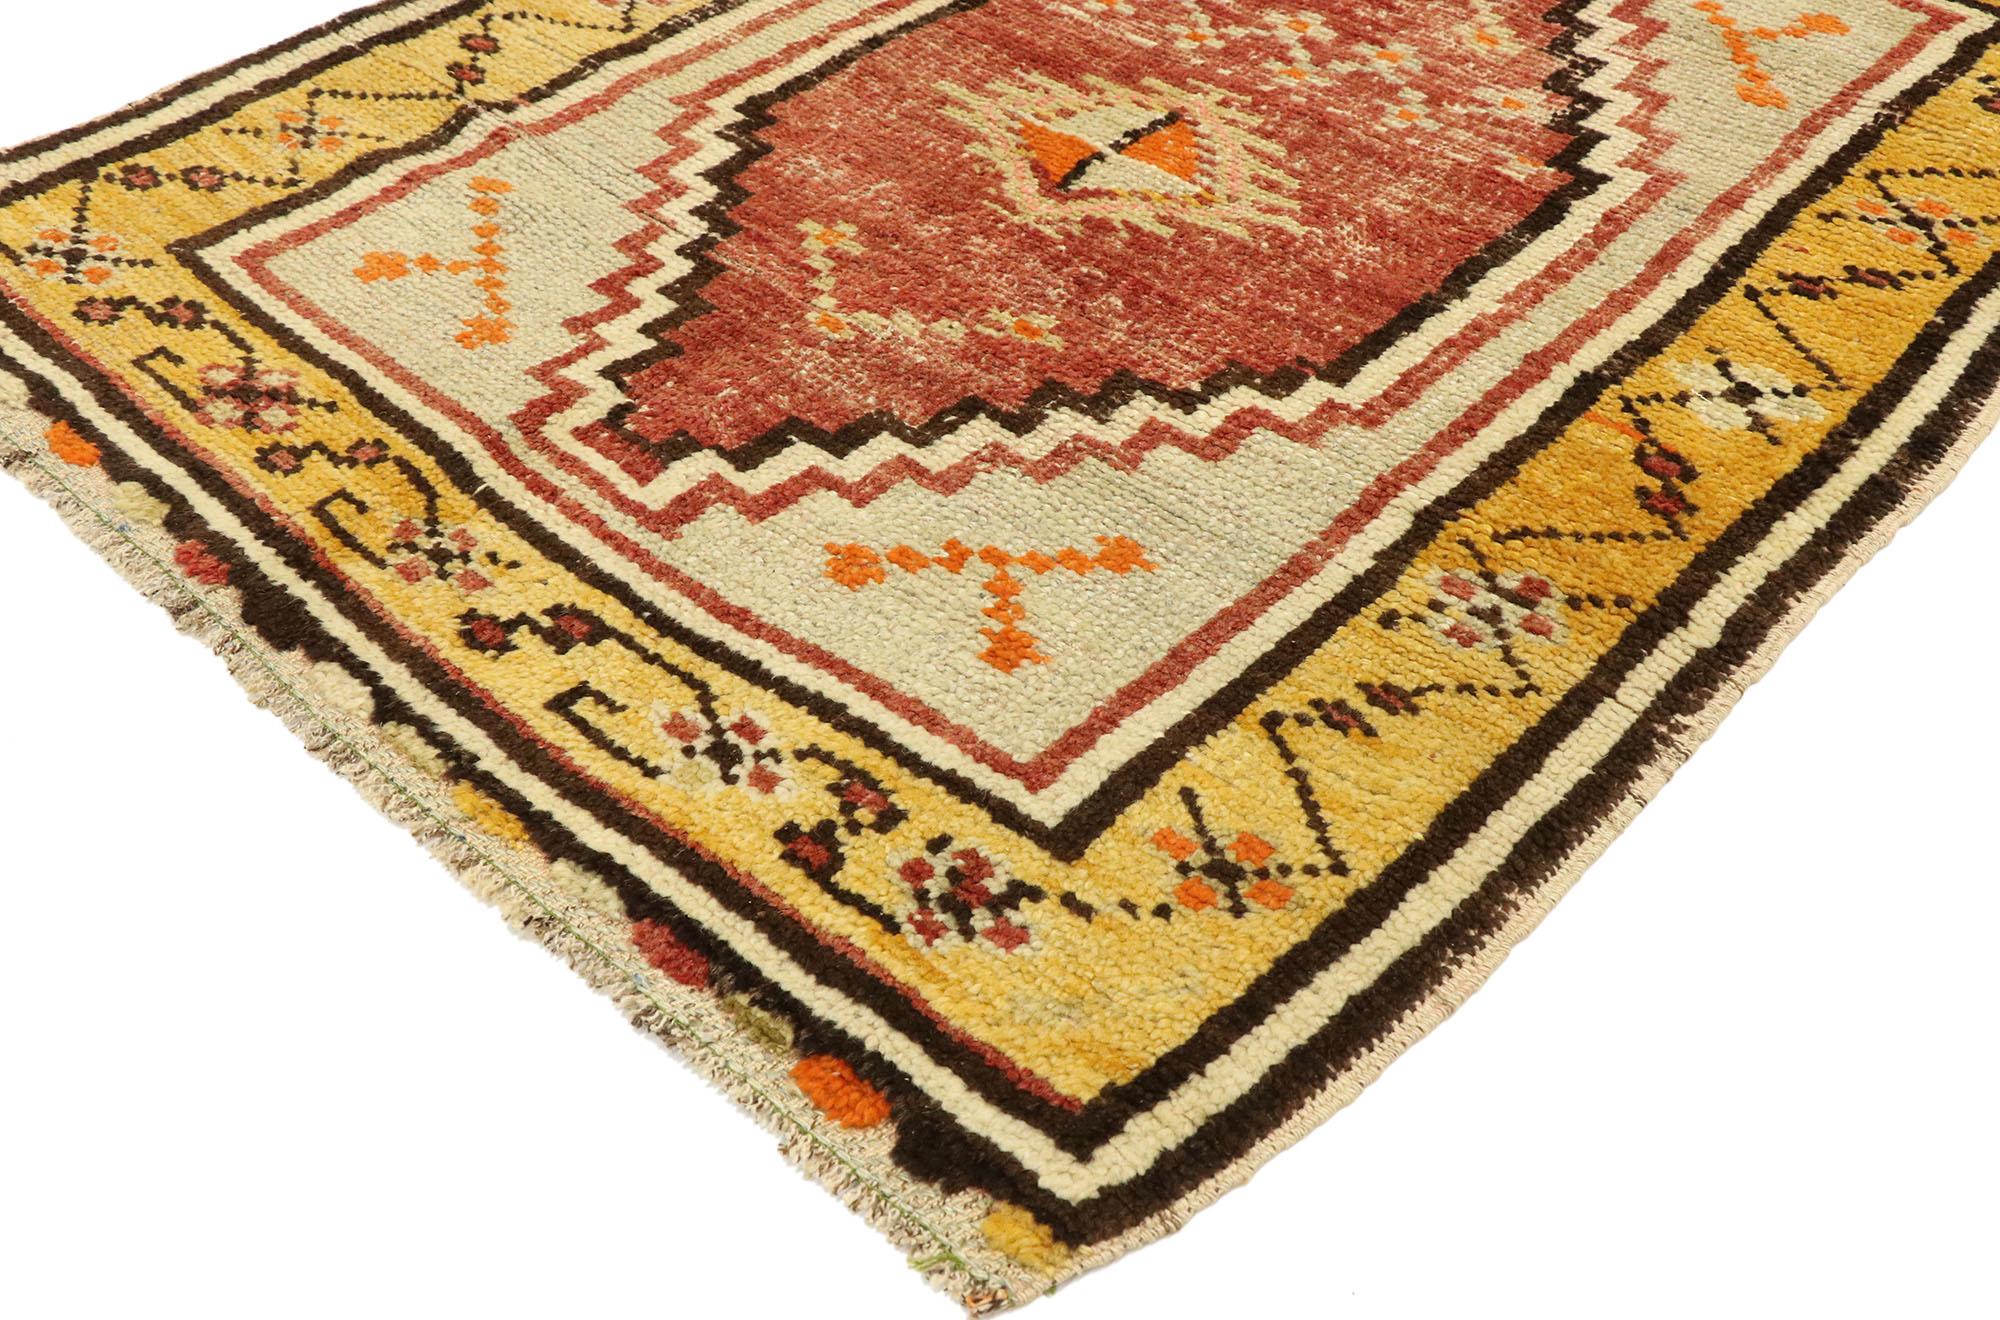 53045 distressed vintage Turkish Oushak rug with rustic Pacific Northwest style. Down-to-earth vibes and rustic sensibility meet Pacific Northwest style in this hand knotted wool distressed vintage Turkish Oushak rug. The stepped cut-out field